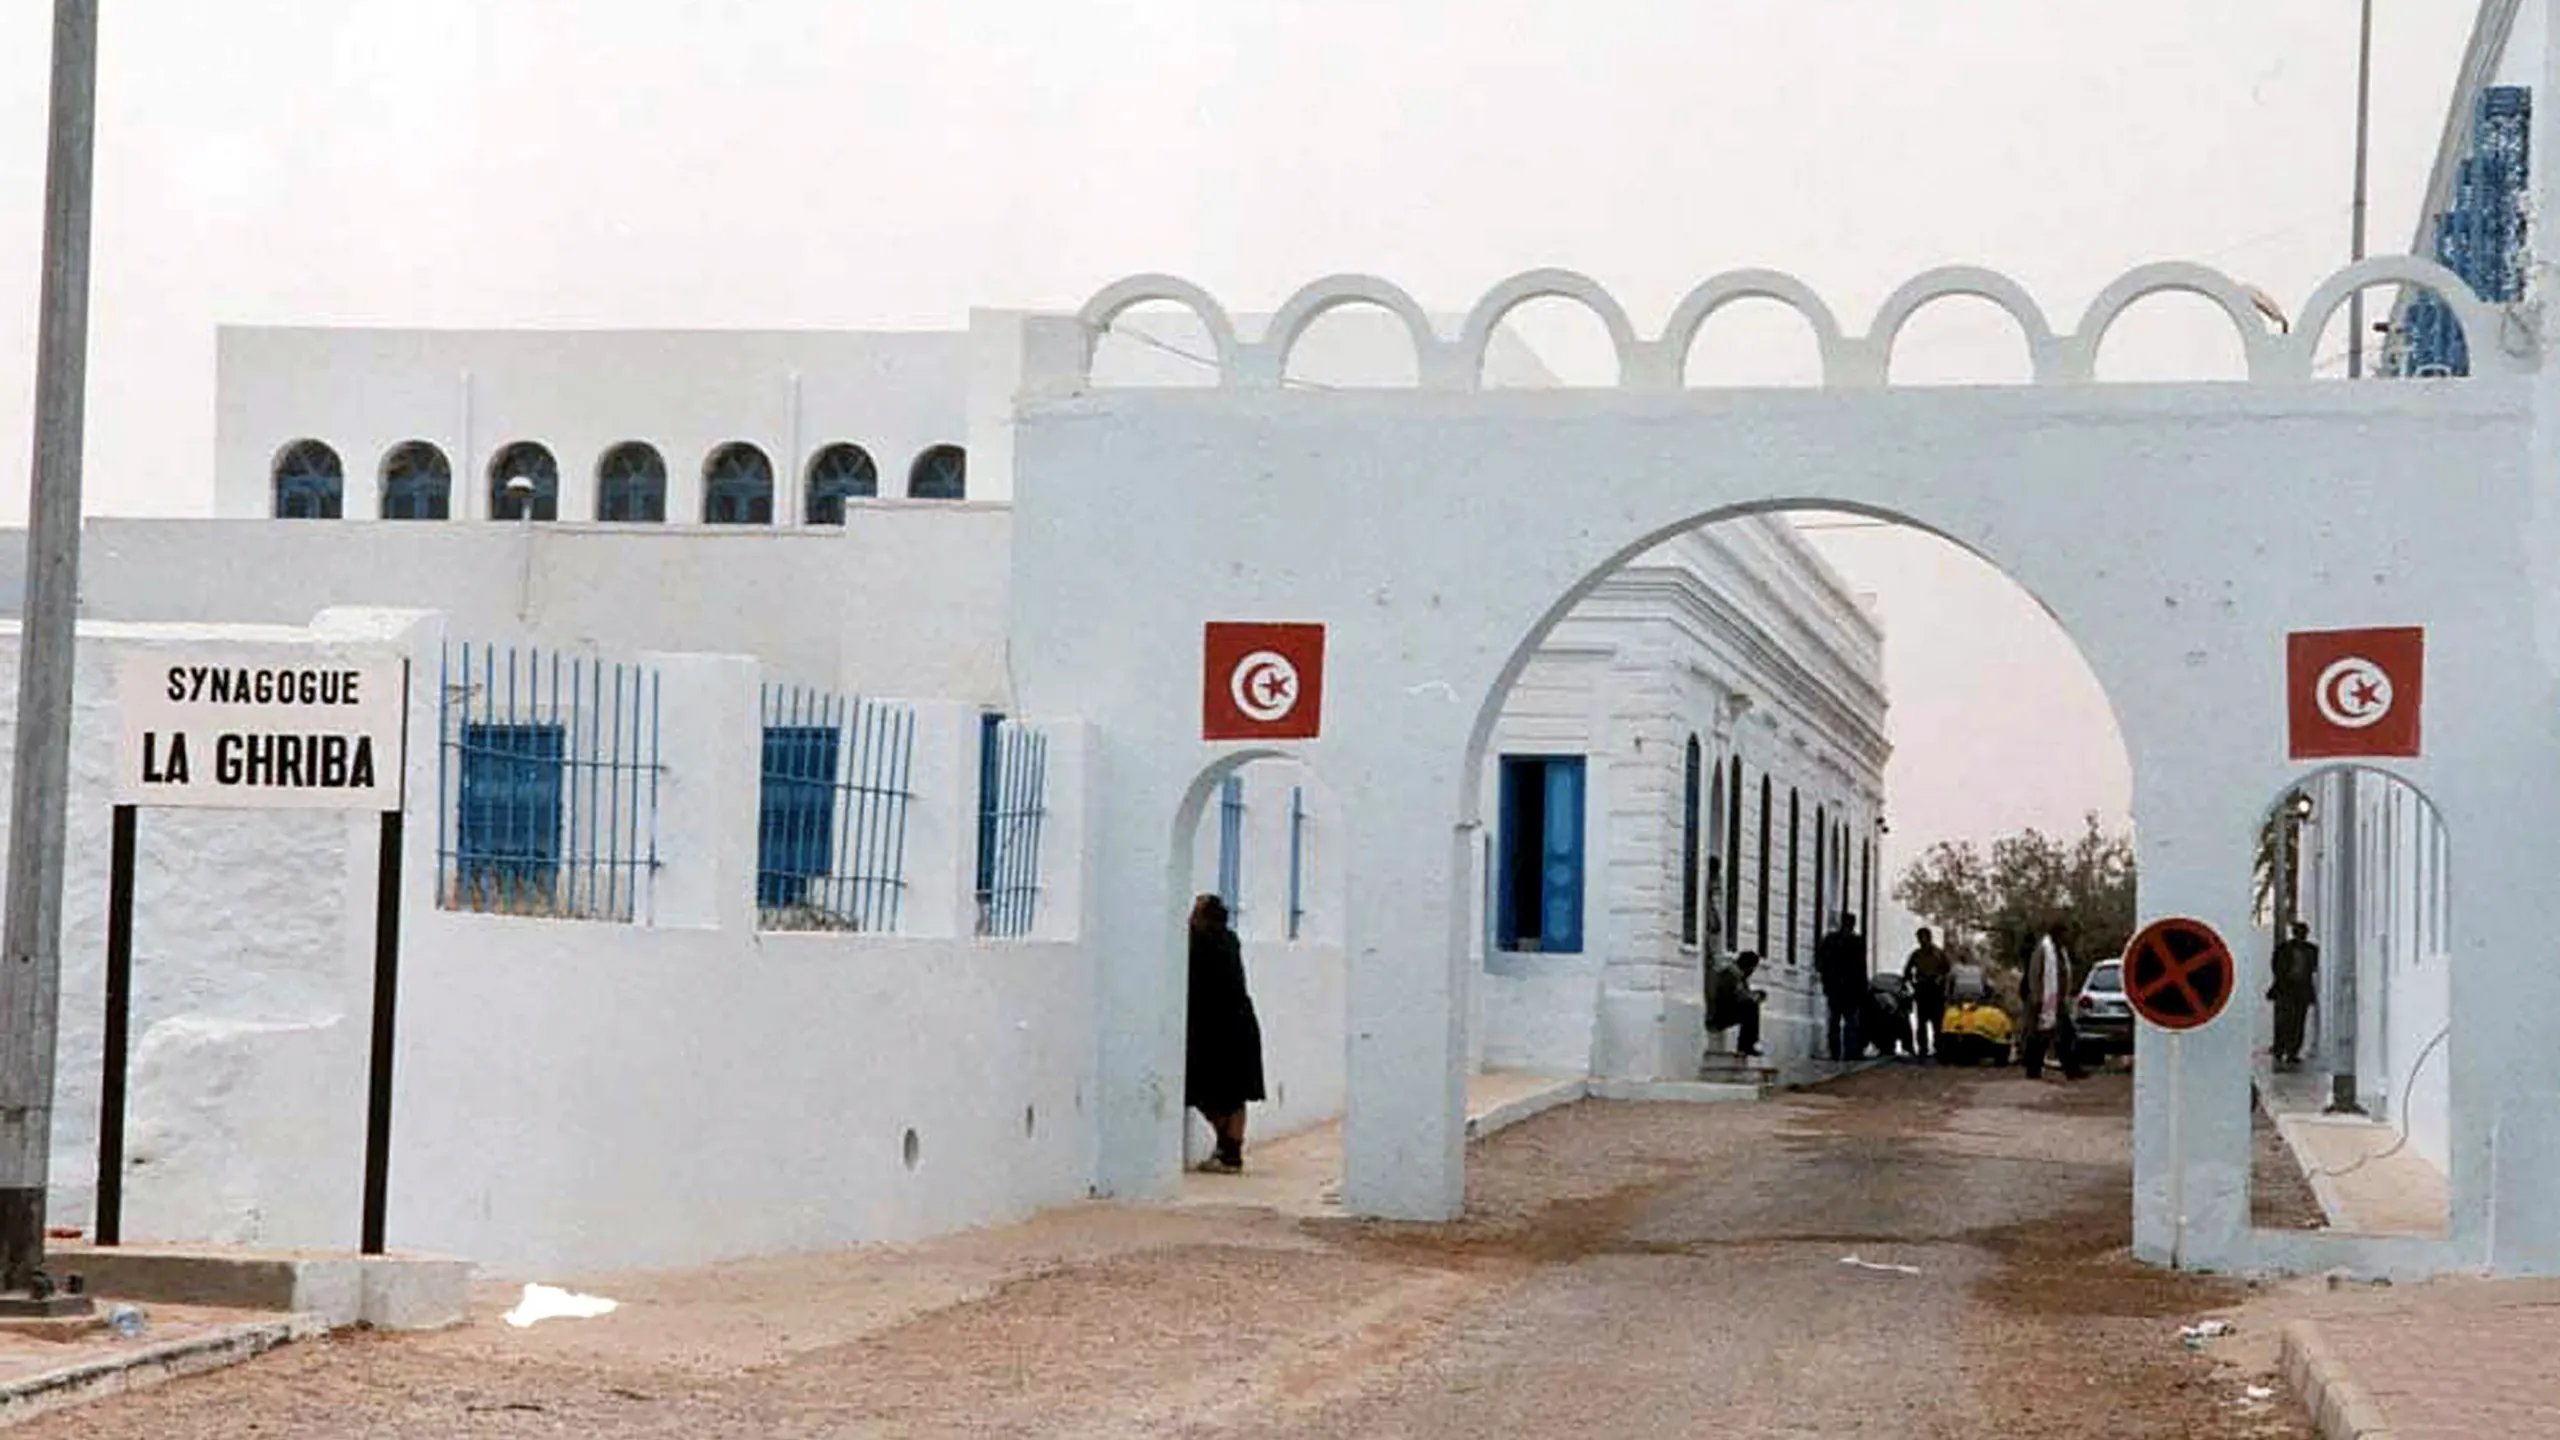 Suspected arsonist in custody for targeting Synagogue in Tunisia